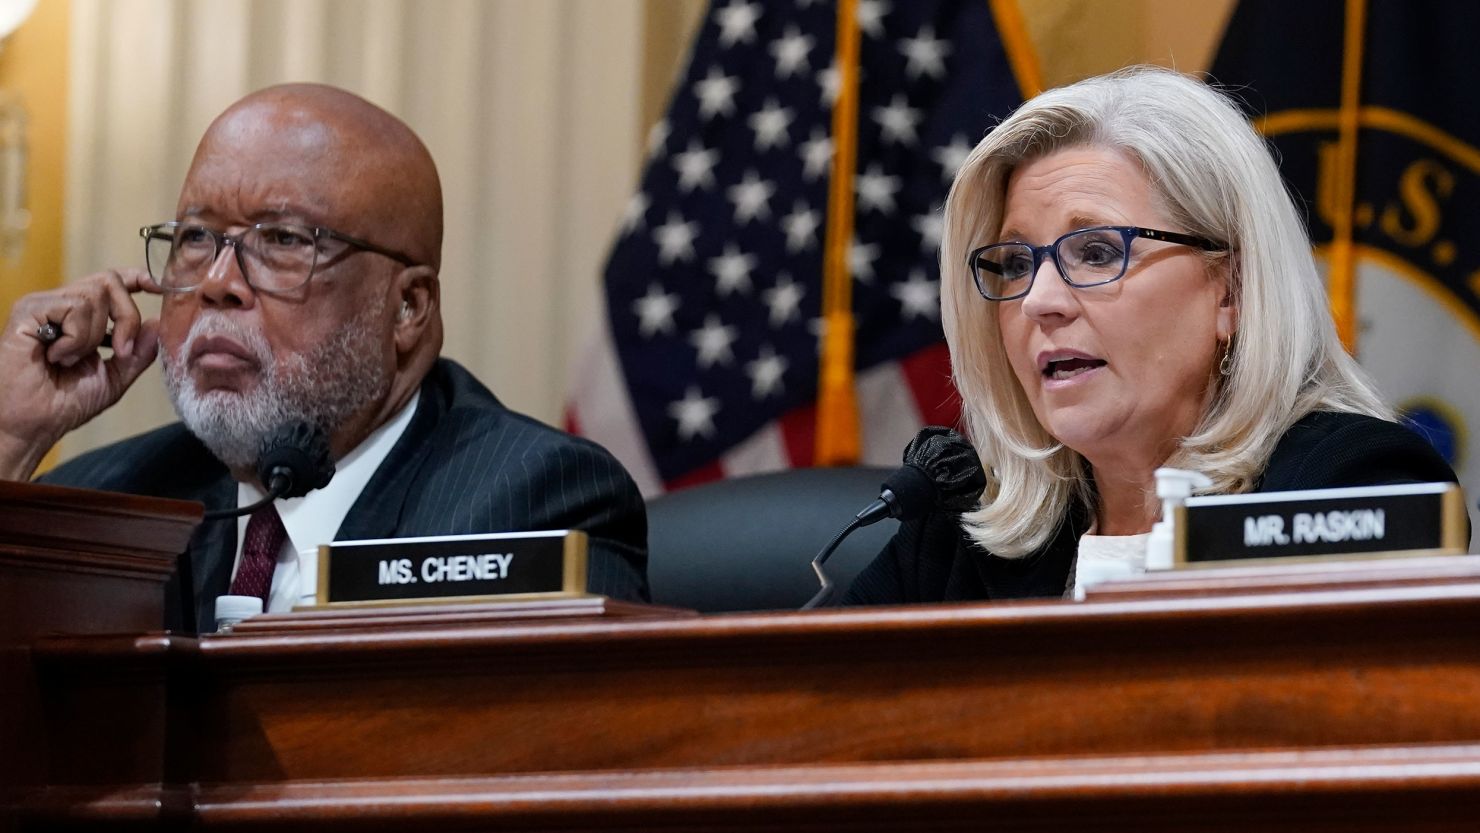 Chairman Bennie Thompson of Mississippi listens as Vice Chair Liz Cheney of Wyoming speaks at a hearing before the House select committee investigating the Jan. 6 attack on the US Capitol.